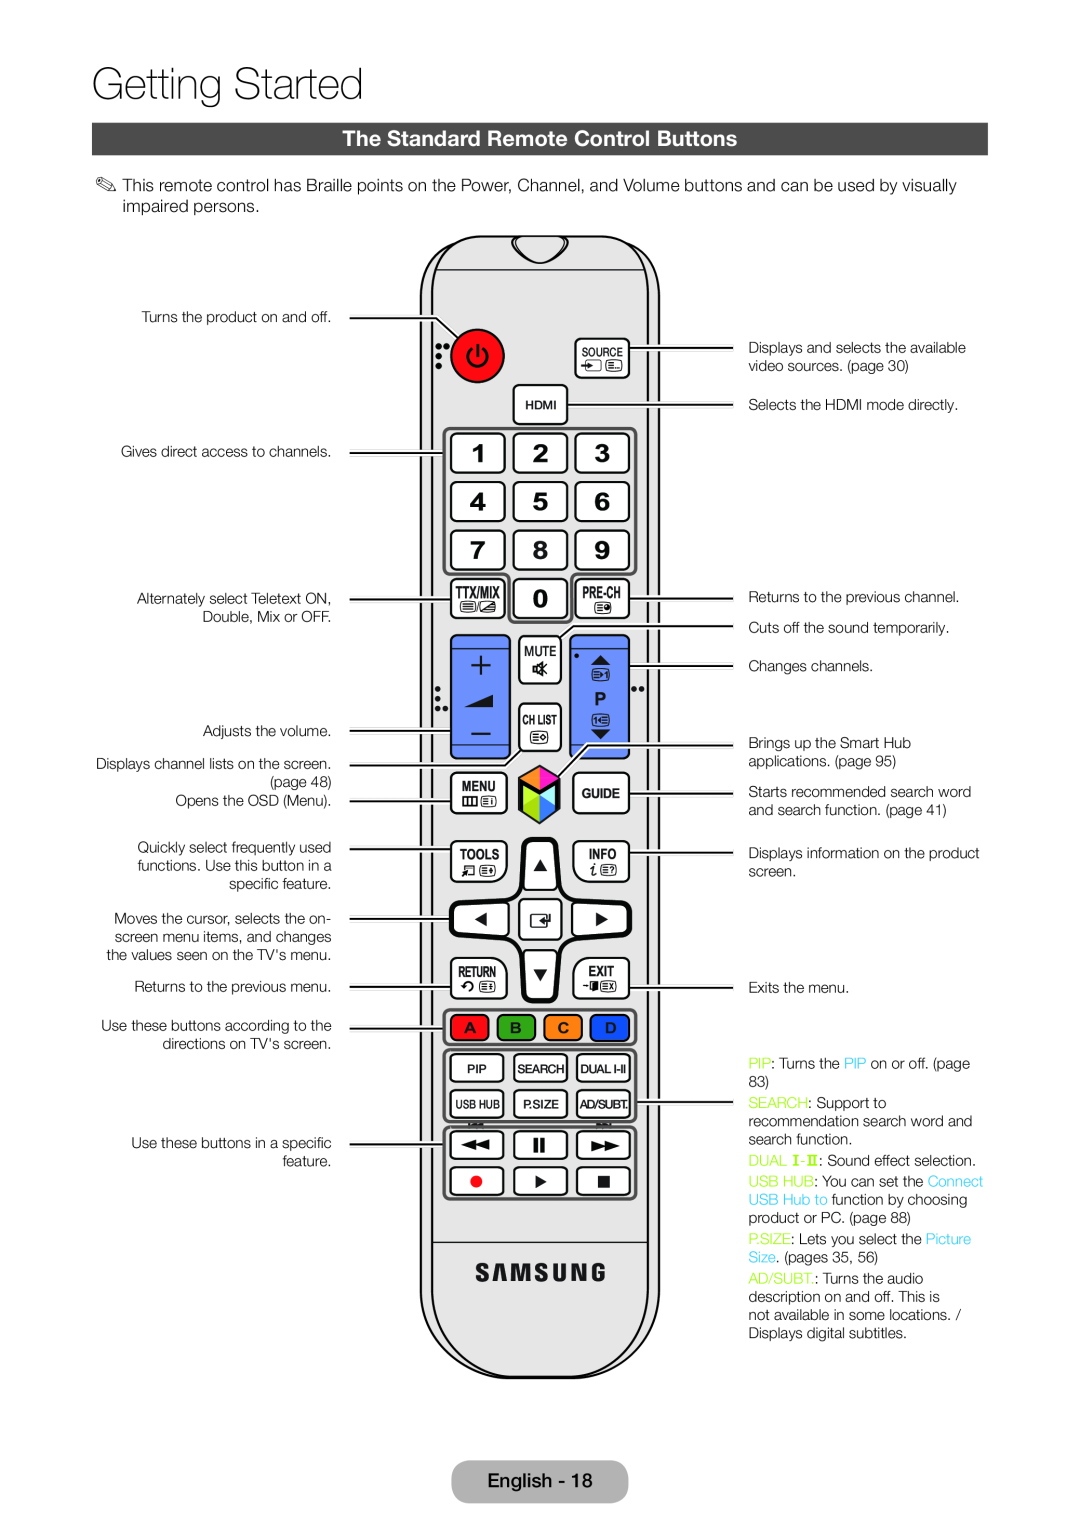 Samsung LT27B750EXH/CI, LT24B750EWV/EN, LT27B750EWV/EN, LT24B750EW/EN The Standard Remote Control Buttons, Getting Started 